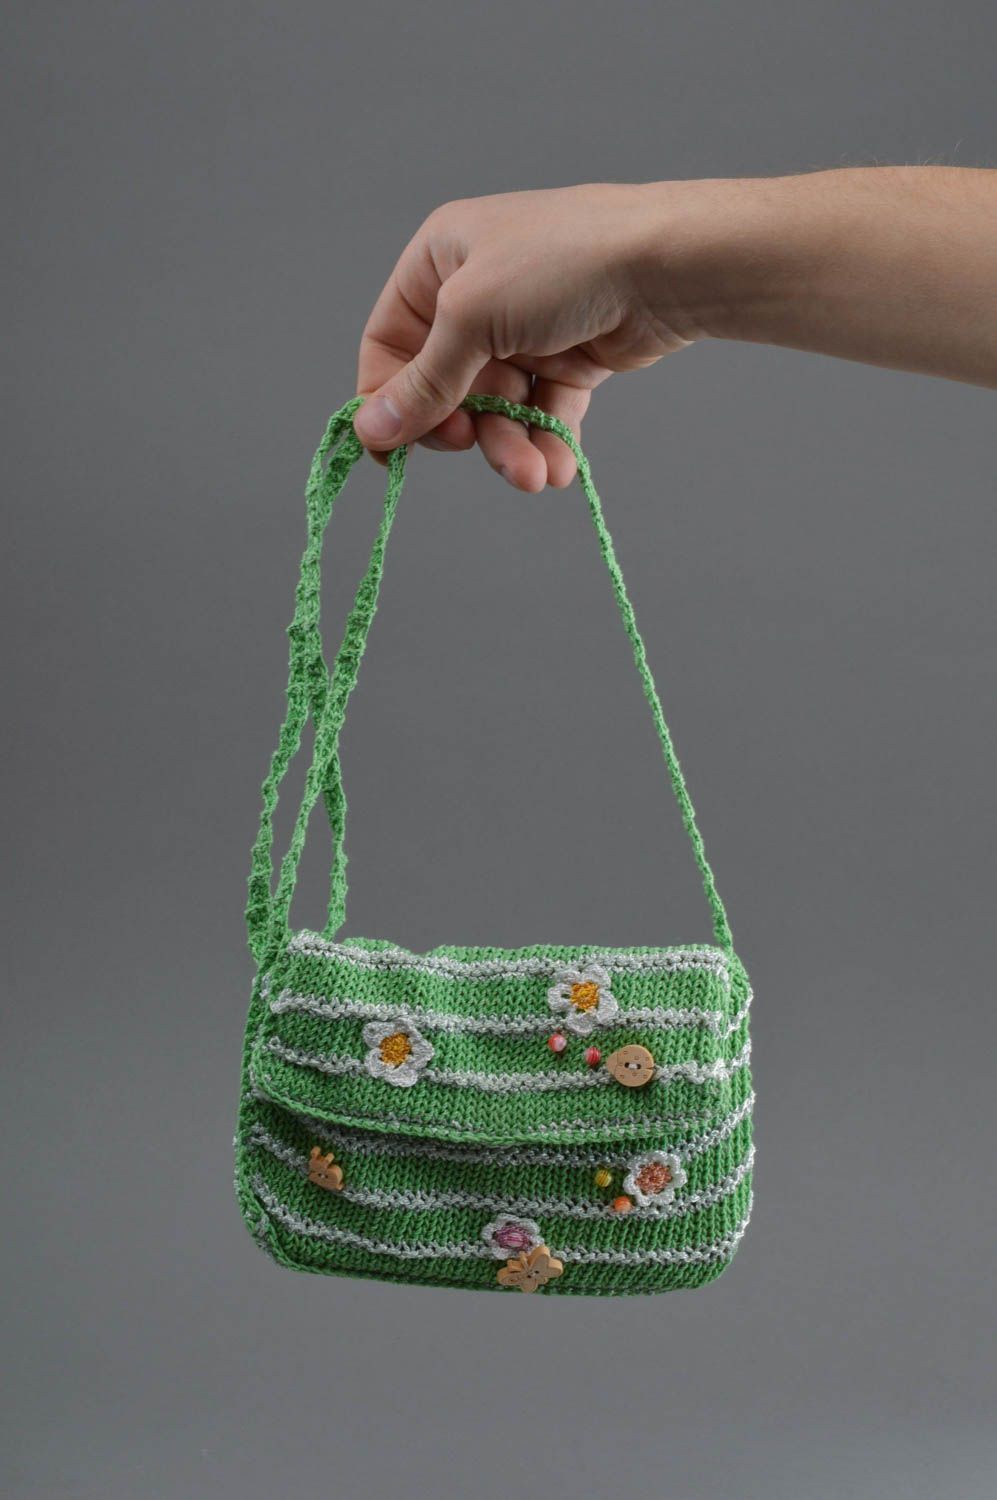 Knitted shoulder bag of green color made of cotton handmade small purse photo 4